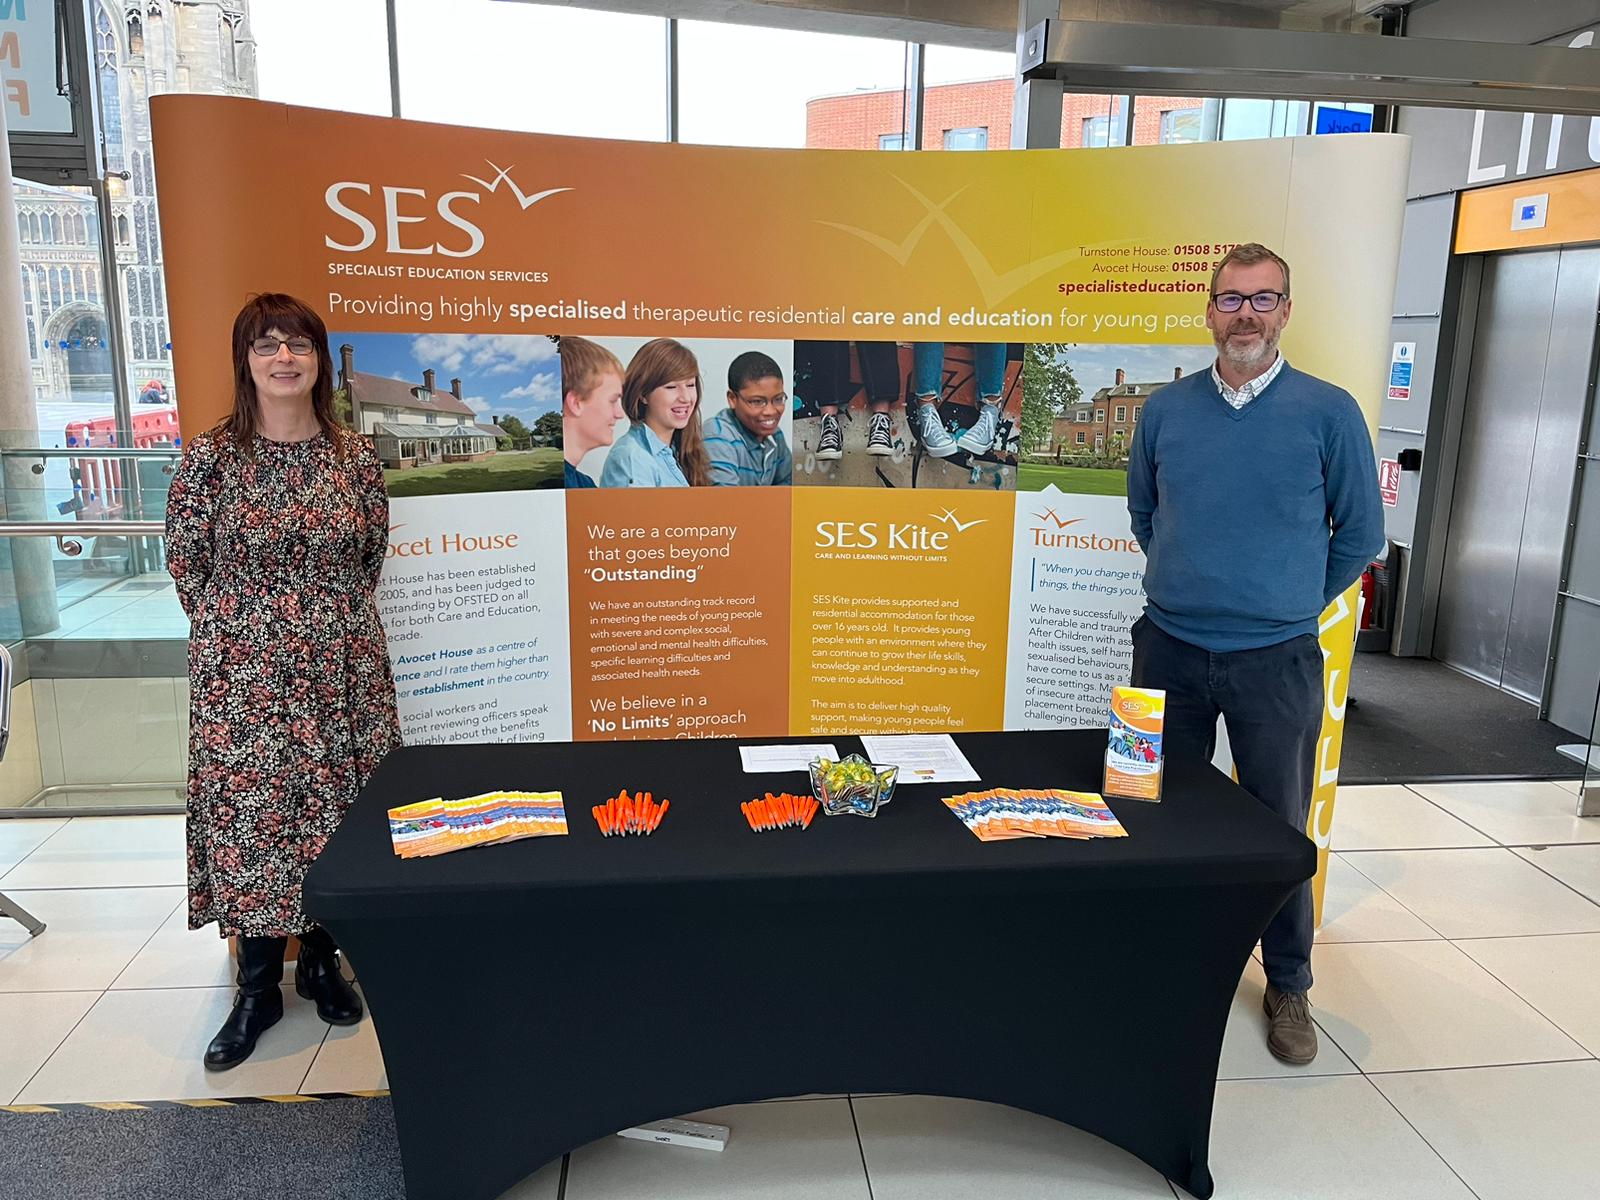 SES at our event in Norwich